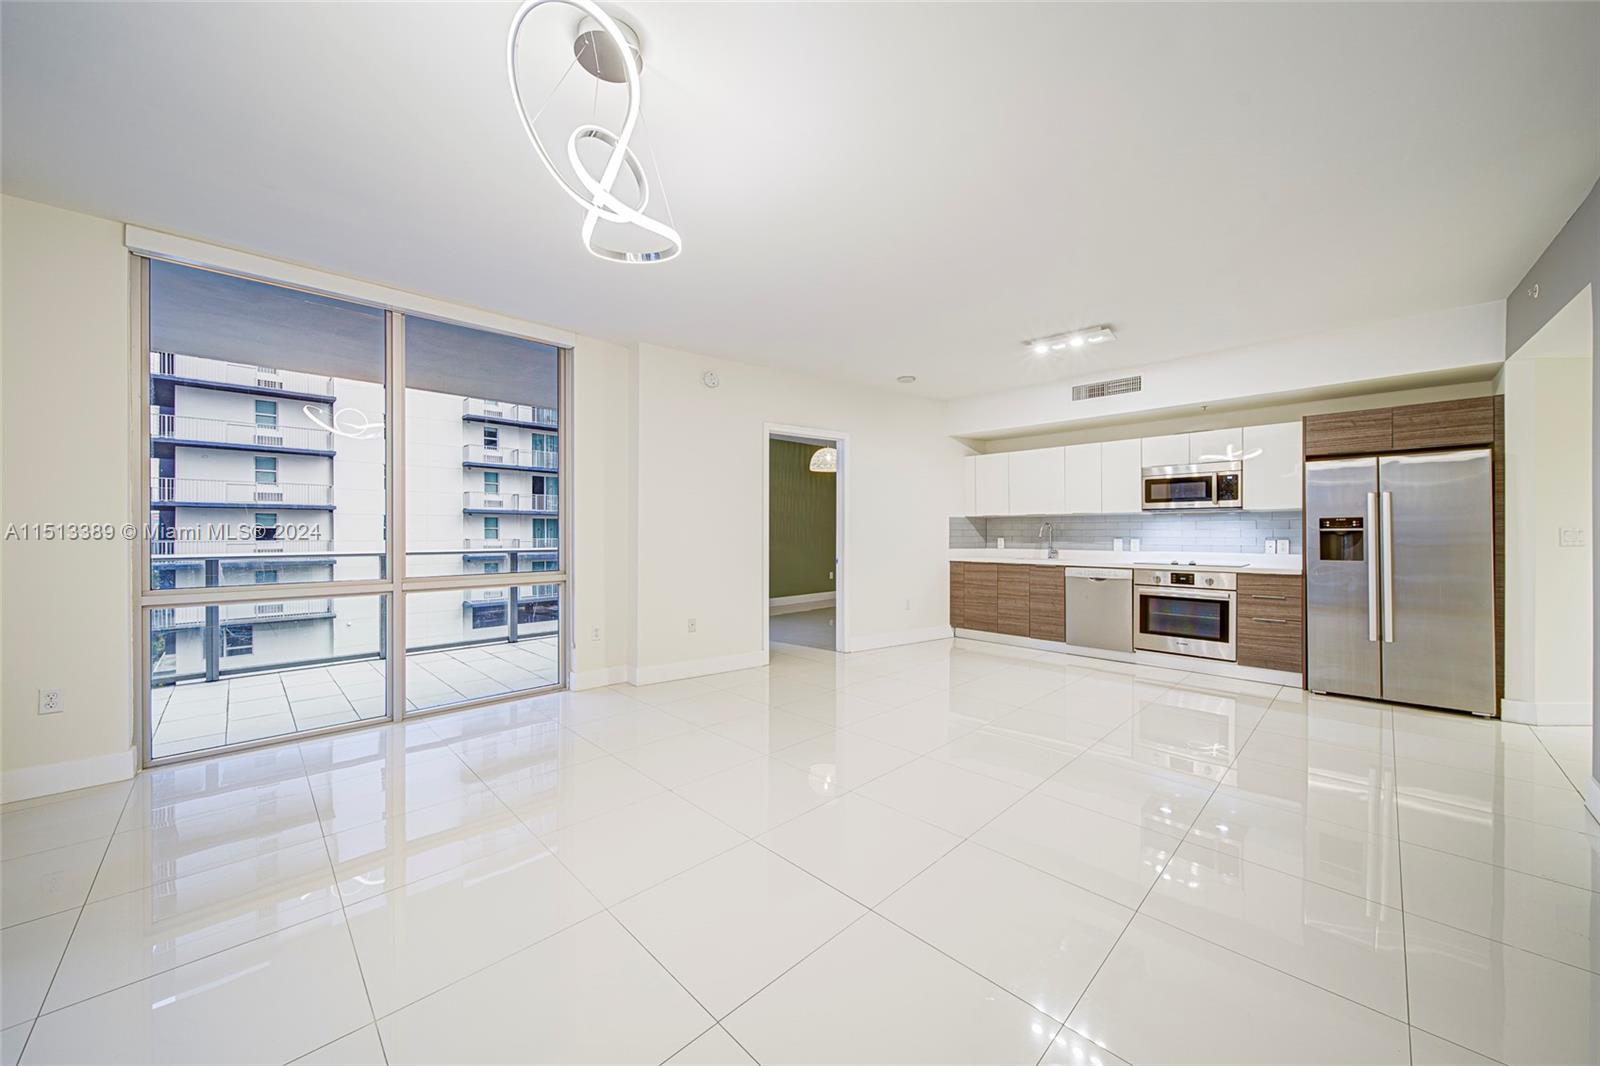 Discover the epitome of urban living in this fully updated 2-bed, 2.5-bath unit in the heart of Miami’s financial district of Brickell. Boasting 1,024 sqft, this spacious unit features an open concept layout with porcelain floors throughout,Ultra modern kitchen with quartz countertops, Bosch appliances, modern bathrooms, custom closets & storage unit. Enjoy beautiful city views from the large wraparound balcony. Prime location, steps away from Metro Rail, Brickell City Centre, Mary Brickell Village & Biscayne Bay. Short drive to South Beach Key Biscayne Downtown Port of Miami & Miami Intl Airport. Amenities include Pool, BBQ, Jacuzzi, Business Center, EV Charge,Child Play Room & Clubroom. Embrace the Miami lifestyle in this chic & convenient Brickell Ten condo. Schedule your showing today!